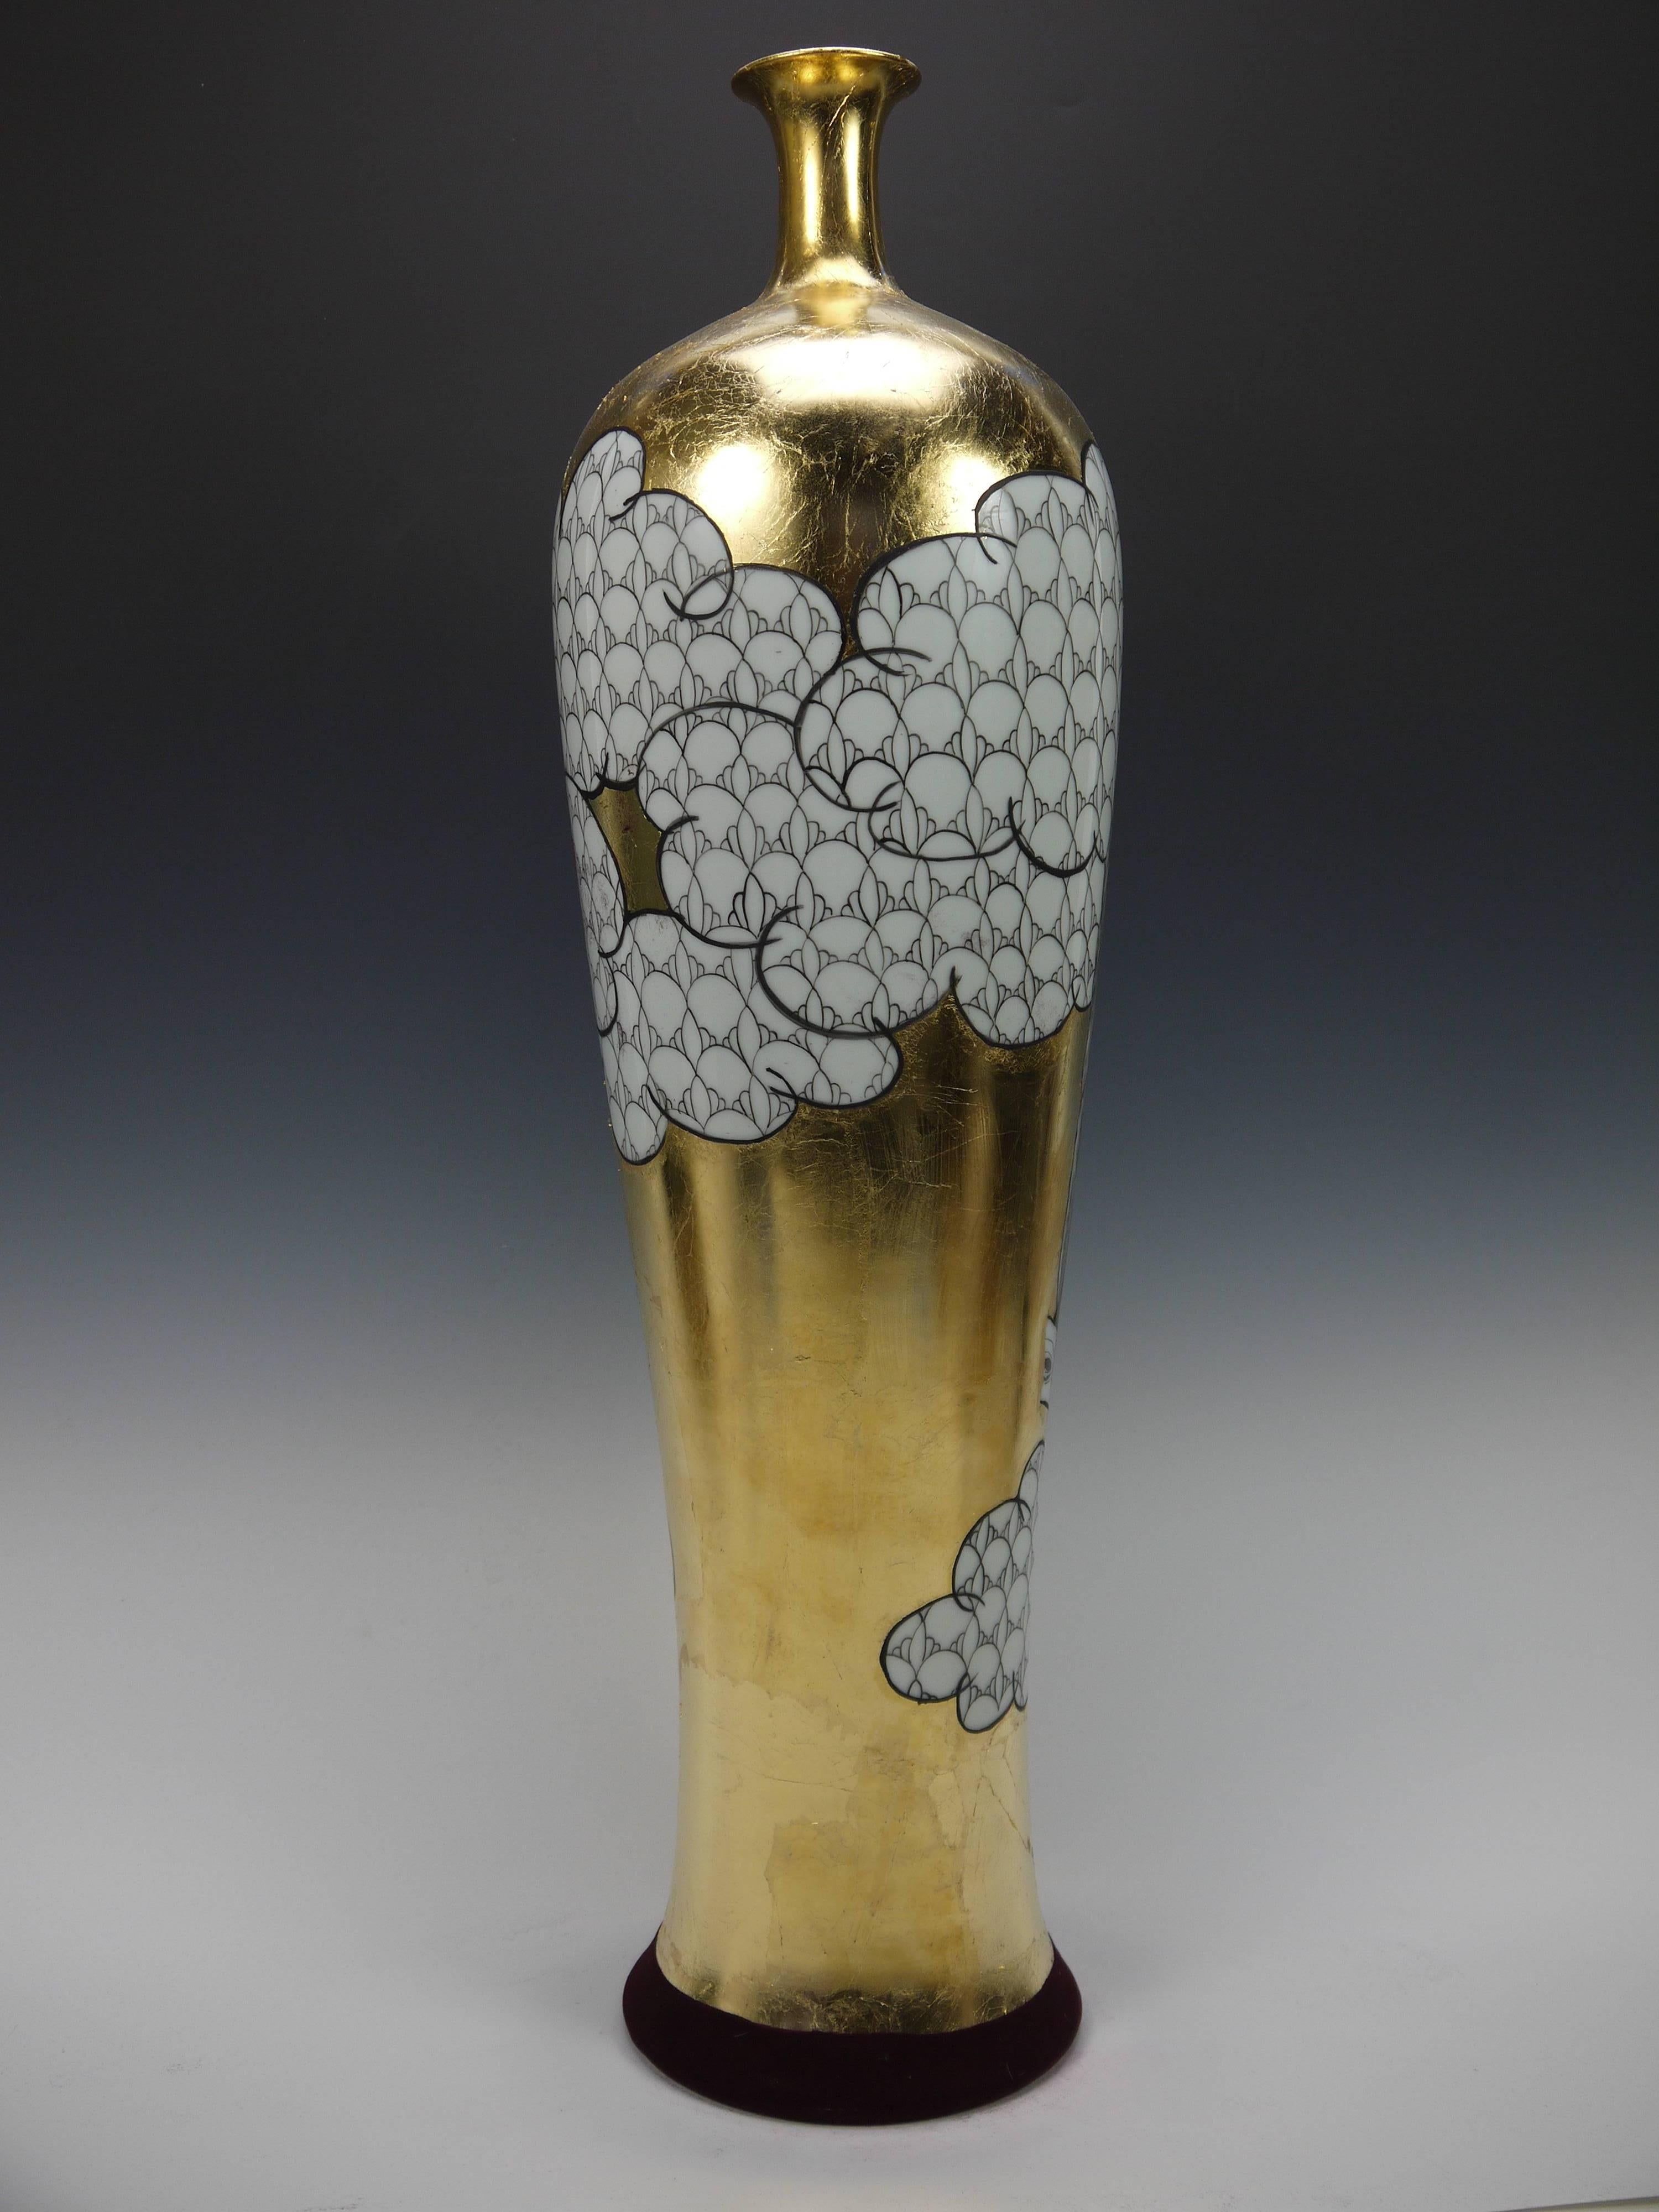 Vase with Owl - Gold Figurative Sculpture by Melanie Sherman